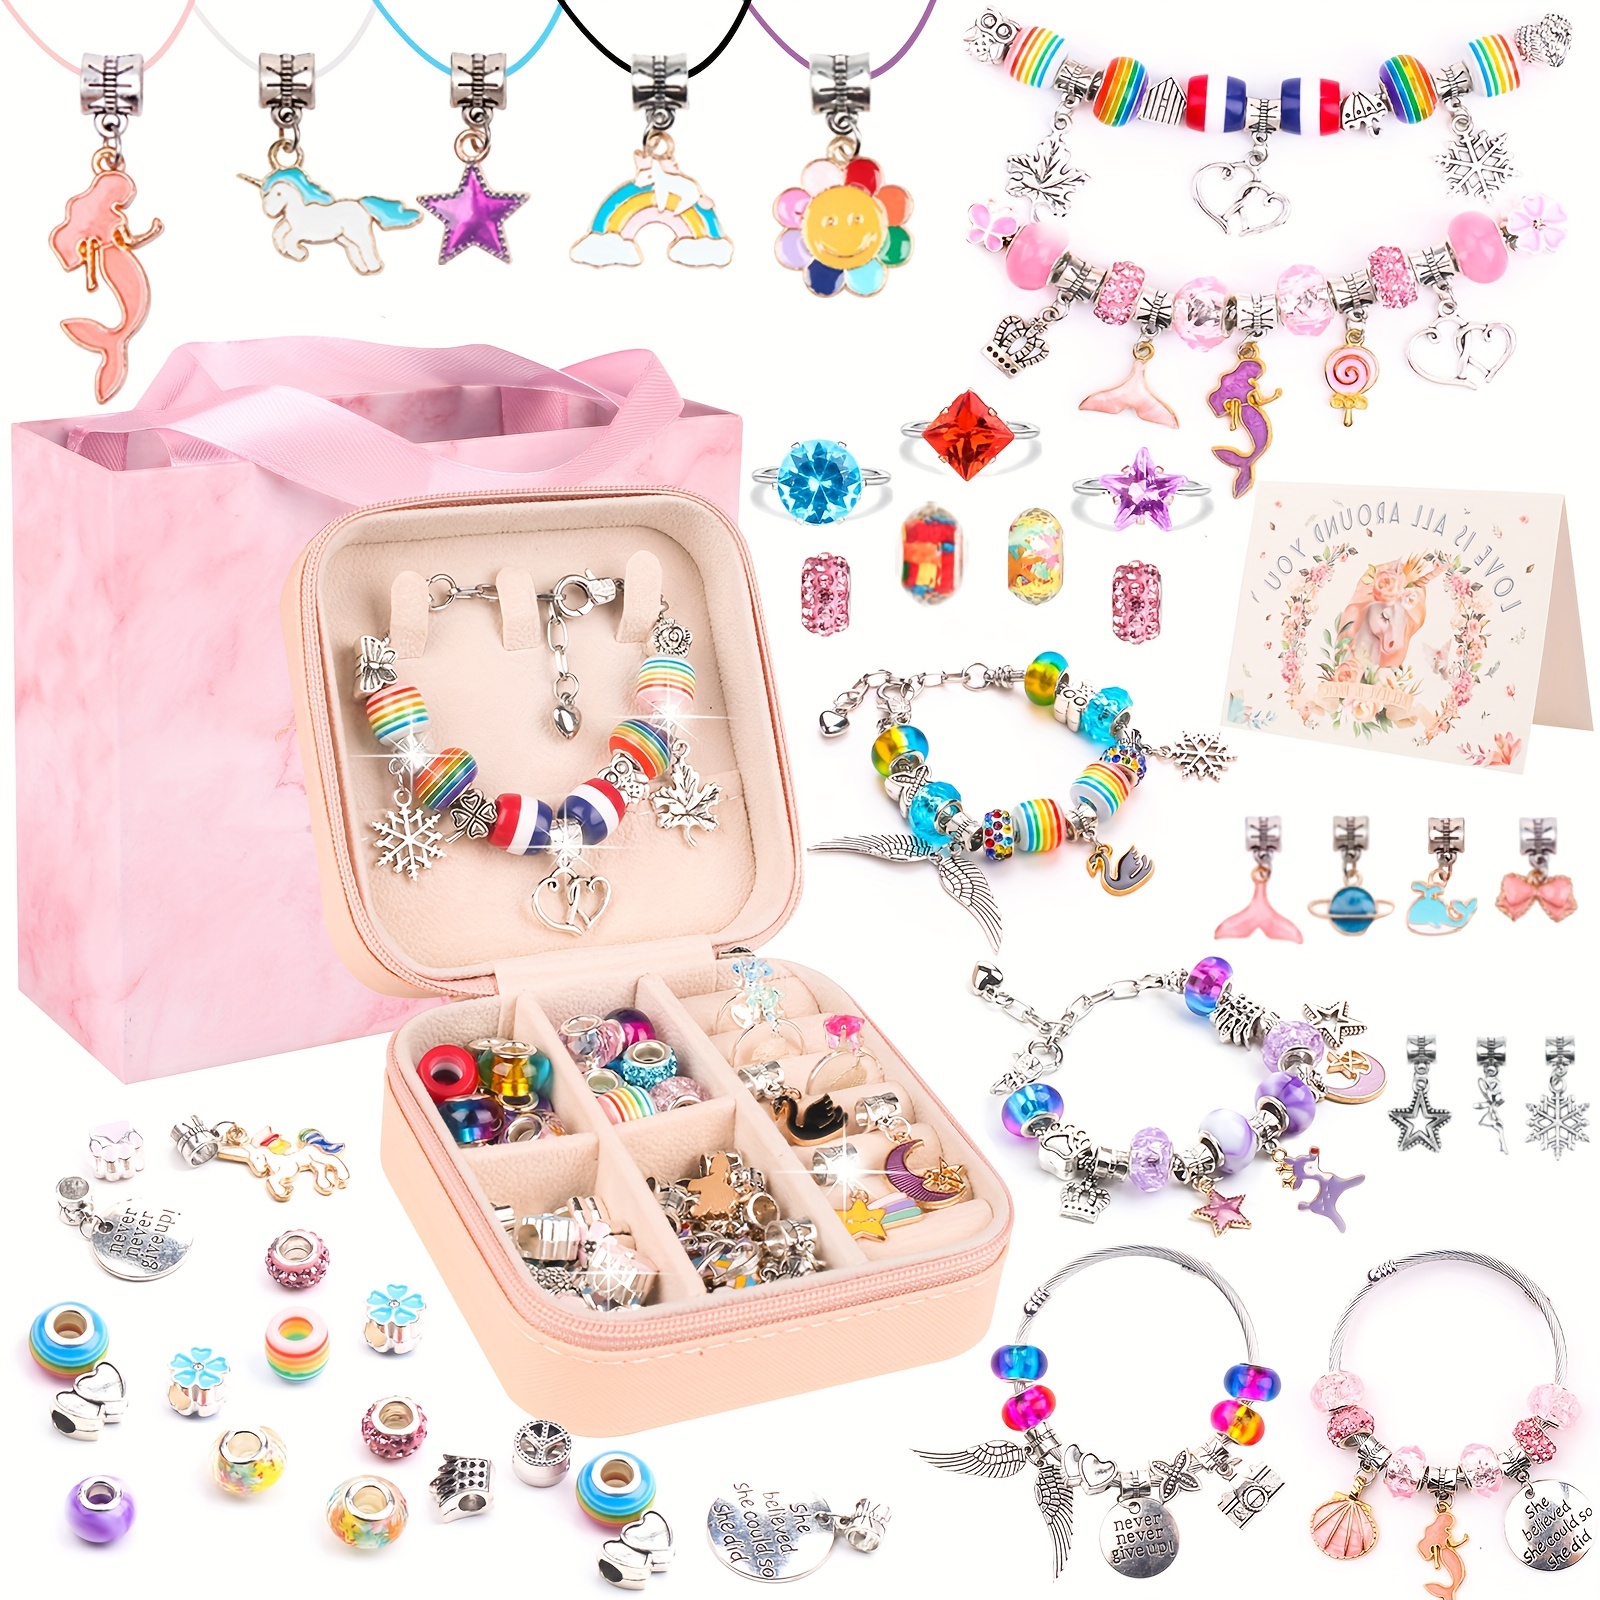  MONOBIN Charm Bracelet Making Kit for Girls, 130 Pieces Jewelry  Making Supplies, Charm Beads for Jewelry Bracelets DIY Craft Kit - Gifts  Idea for Teen Girls